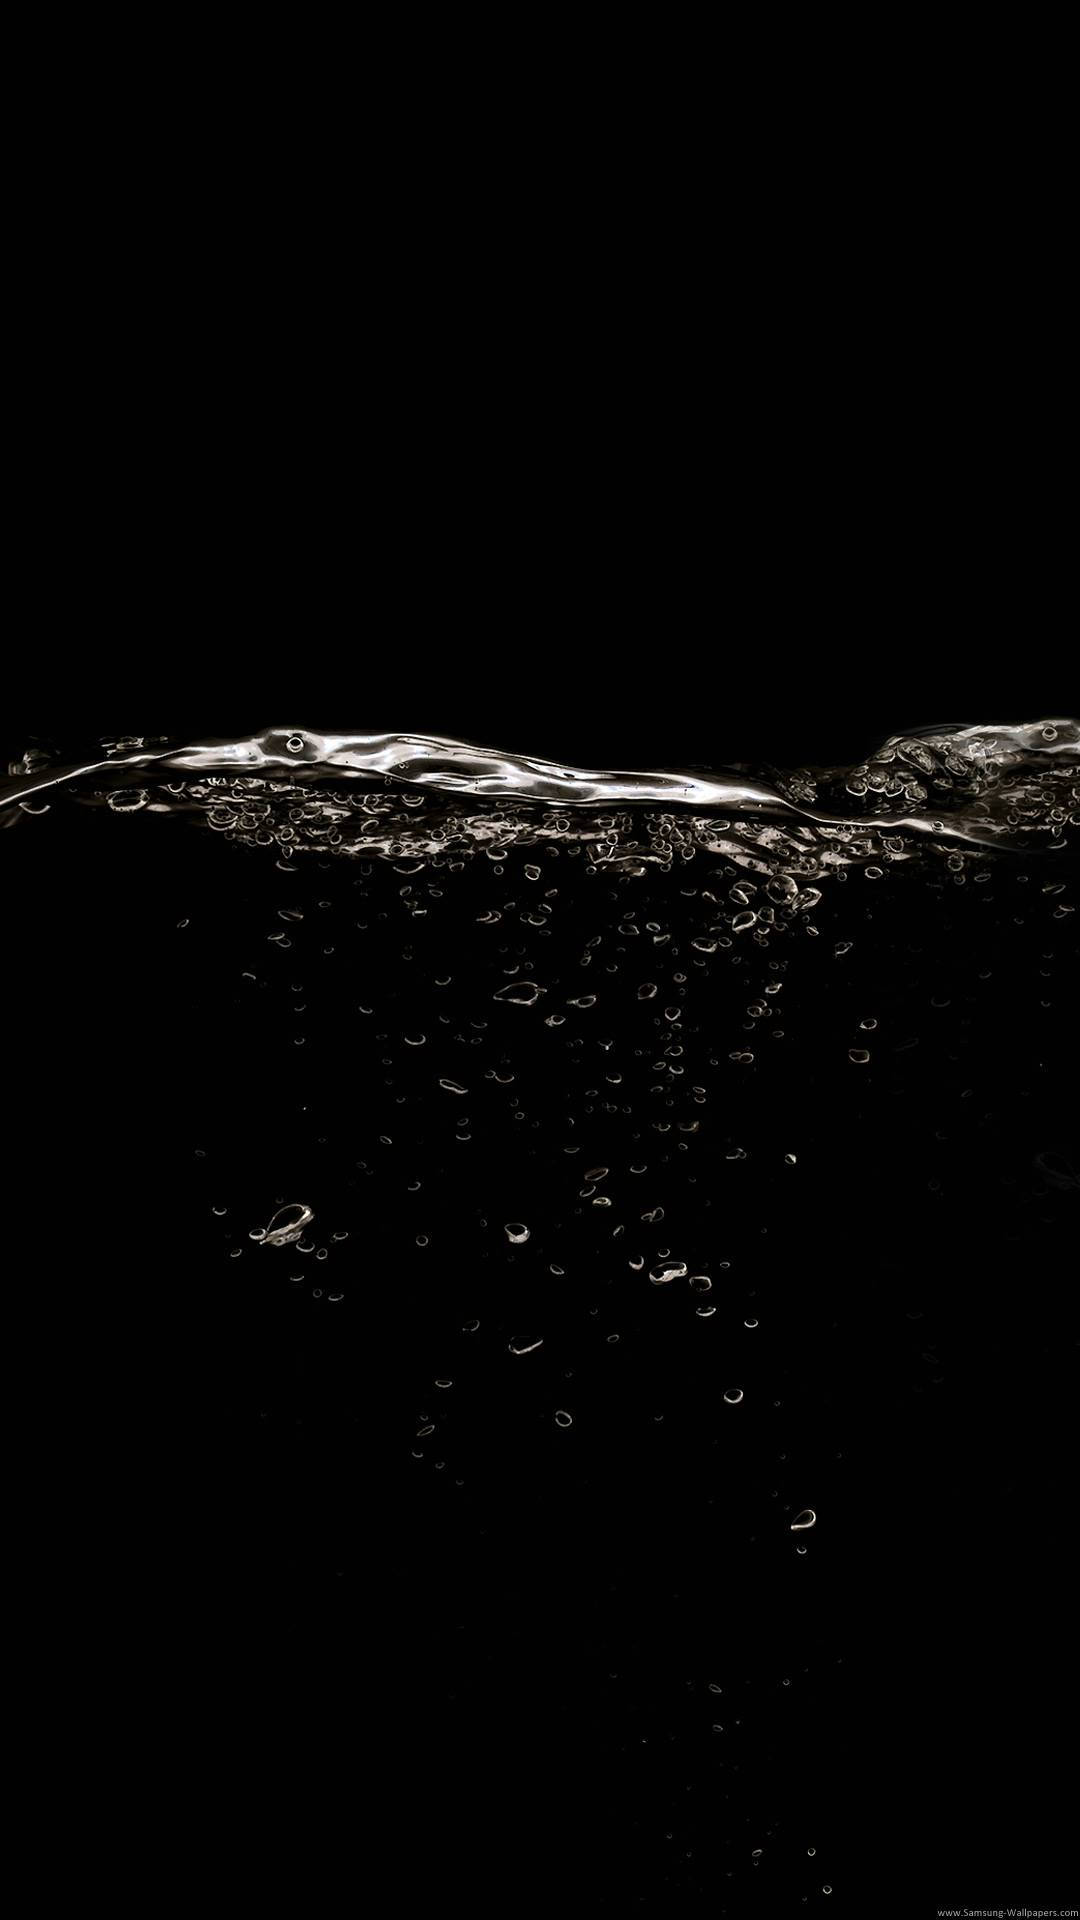 Water Moving On A Blank Black Wallpaper